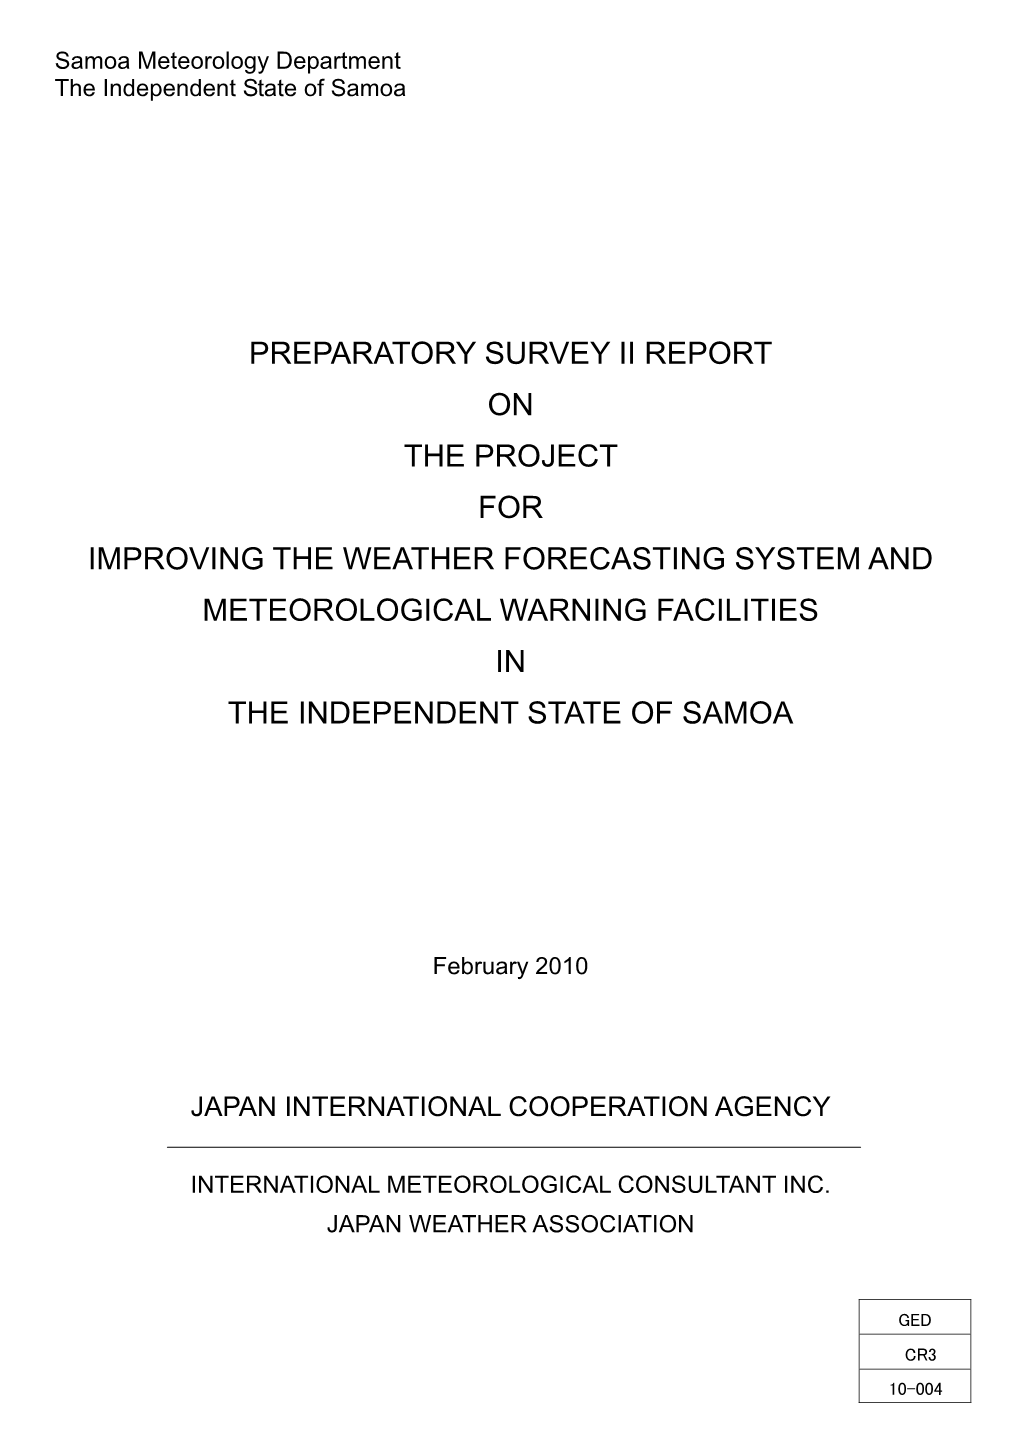 Preparatory Survey Ii Report on the Project for Improving the Weather Forecasting System and Meteorological Warning Facilities in the Independent State of Samoa